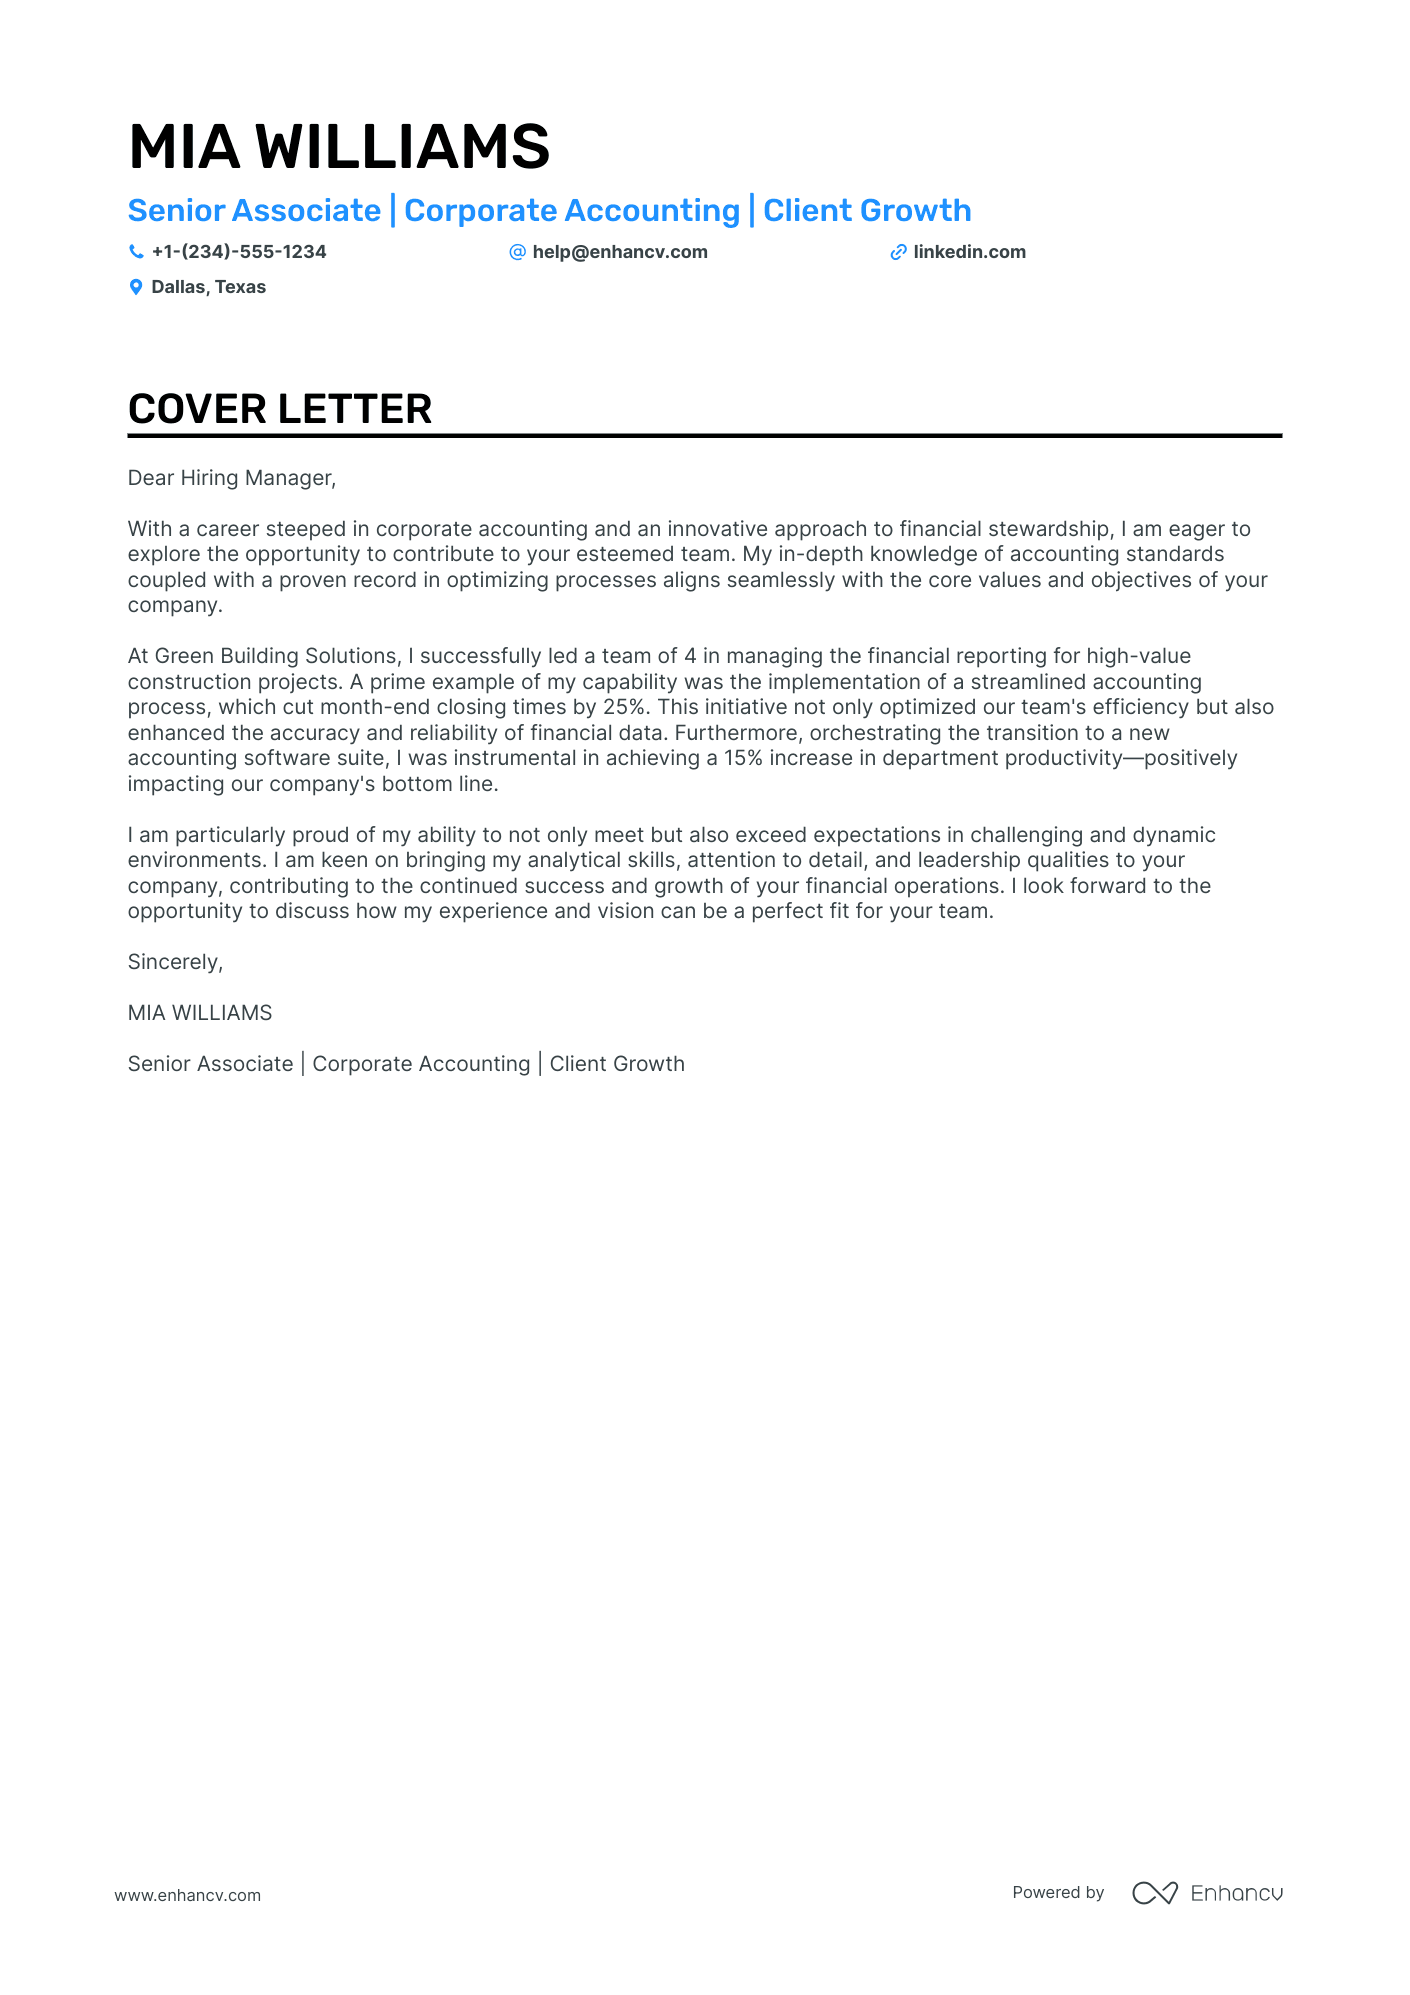 Corporate Accounting cover letter